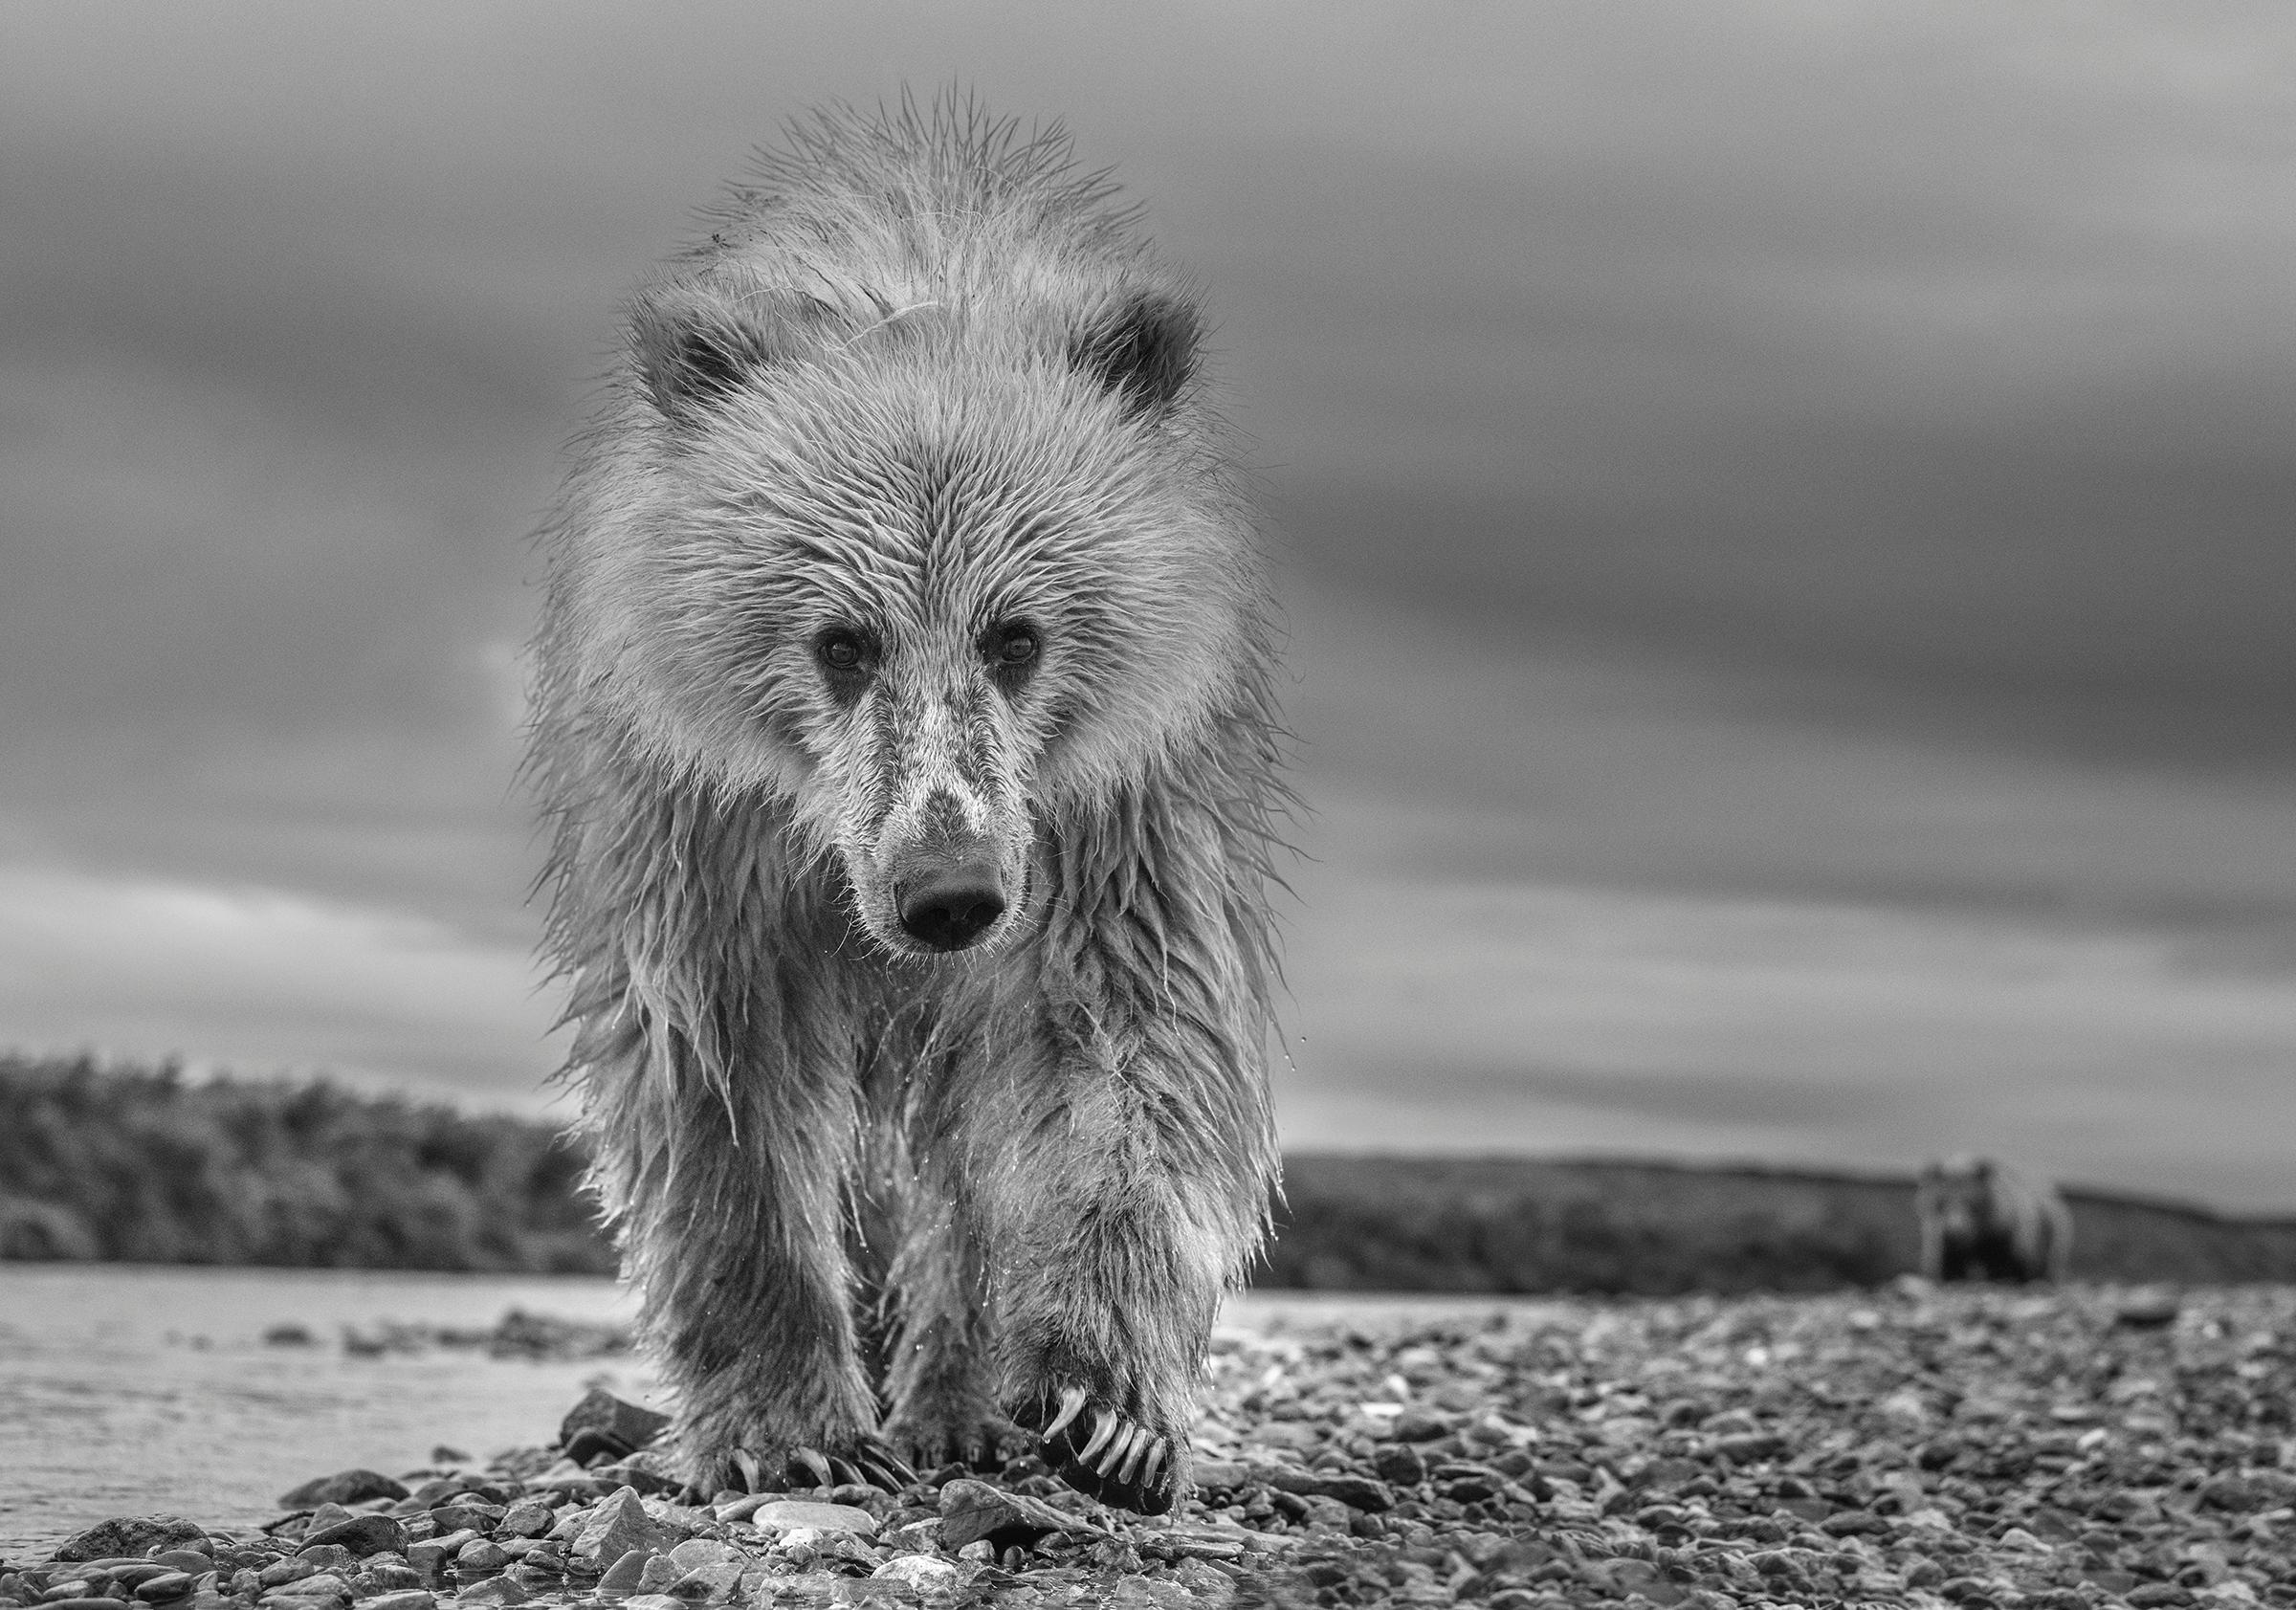 David Yarrow Black and White Photograph - TED